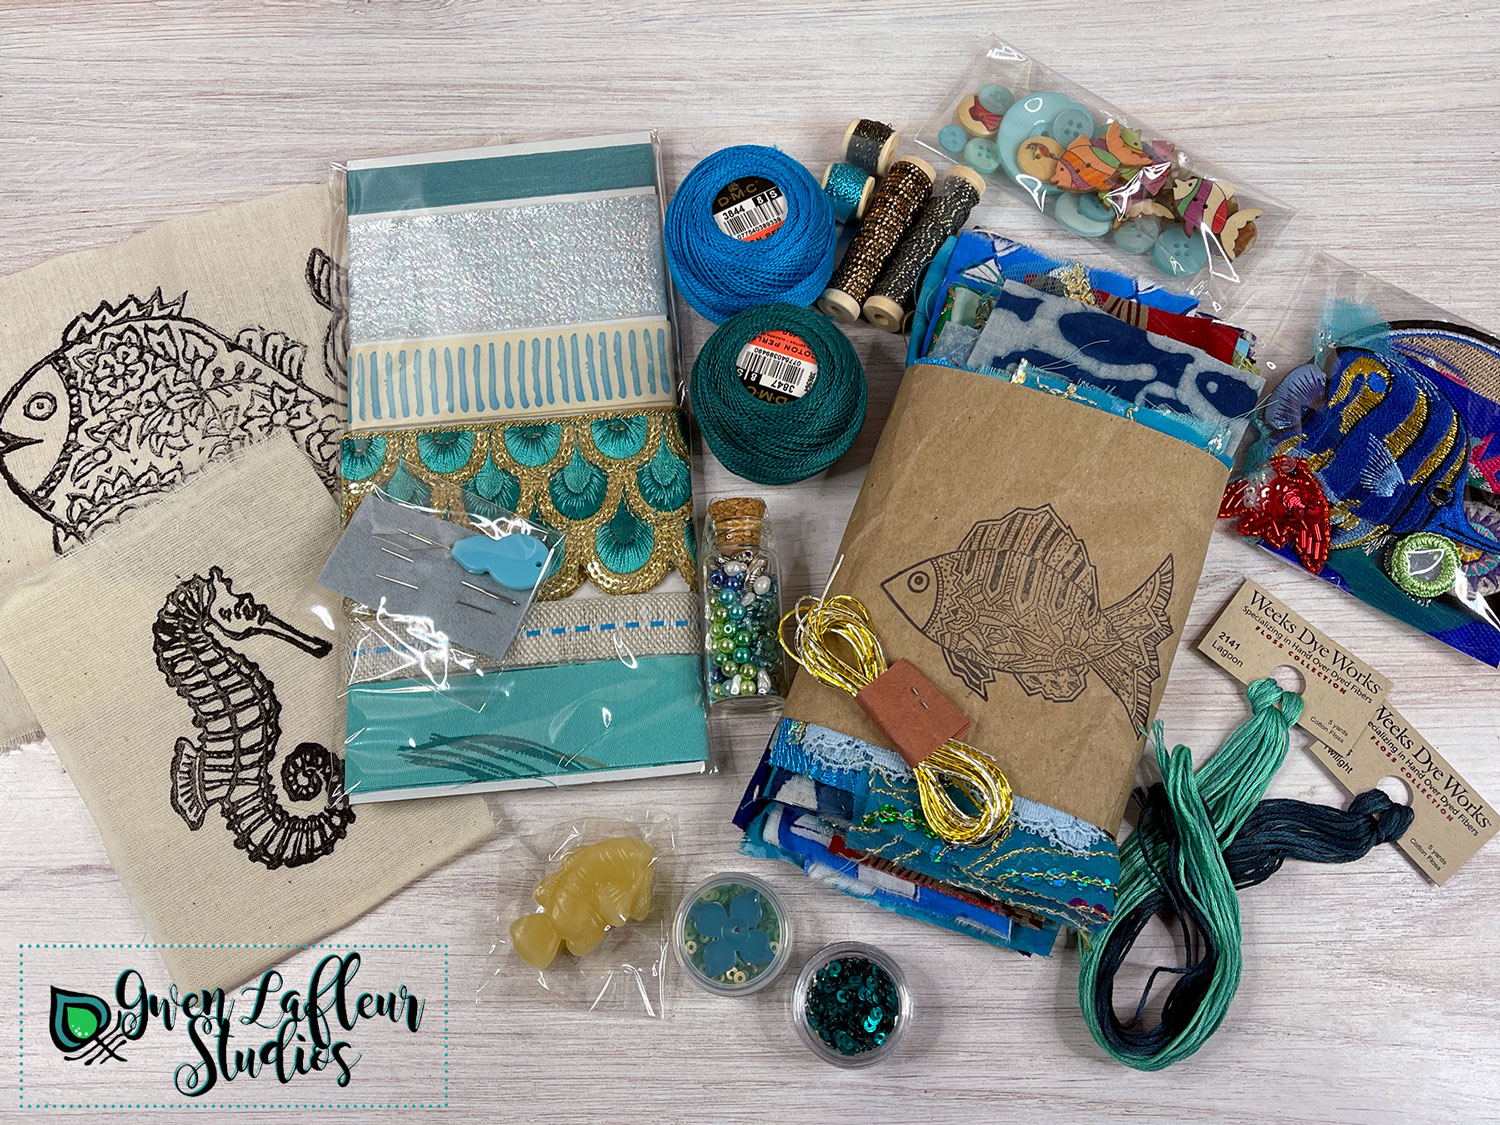 Slow Stitch Pack, Assorted Fabrics – Artistic Artifacts